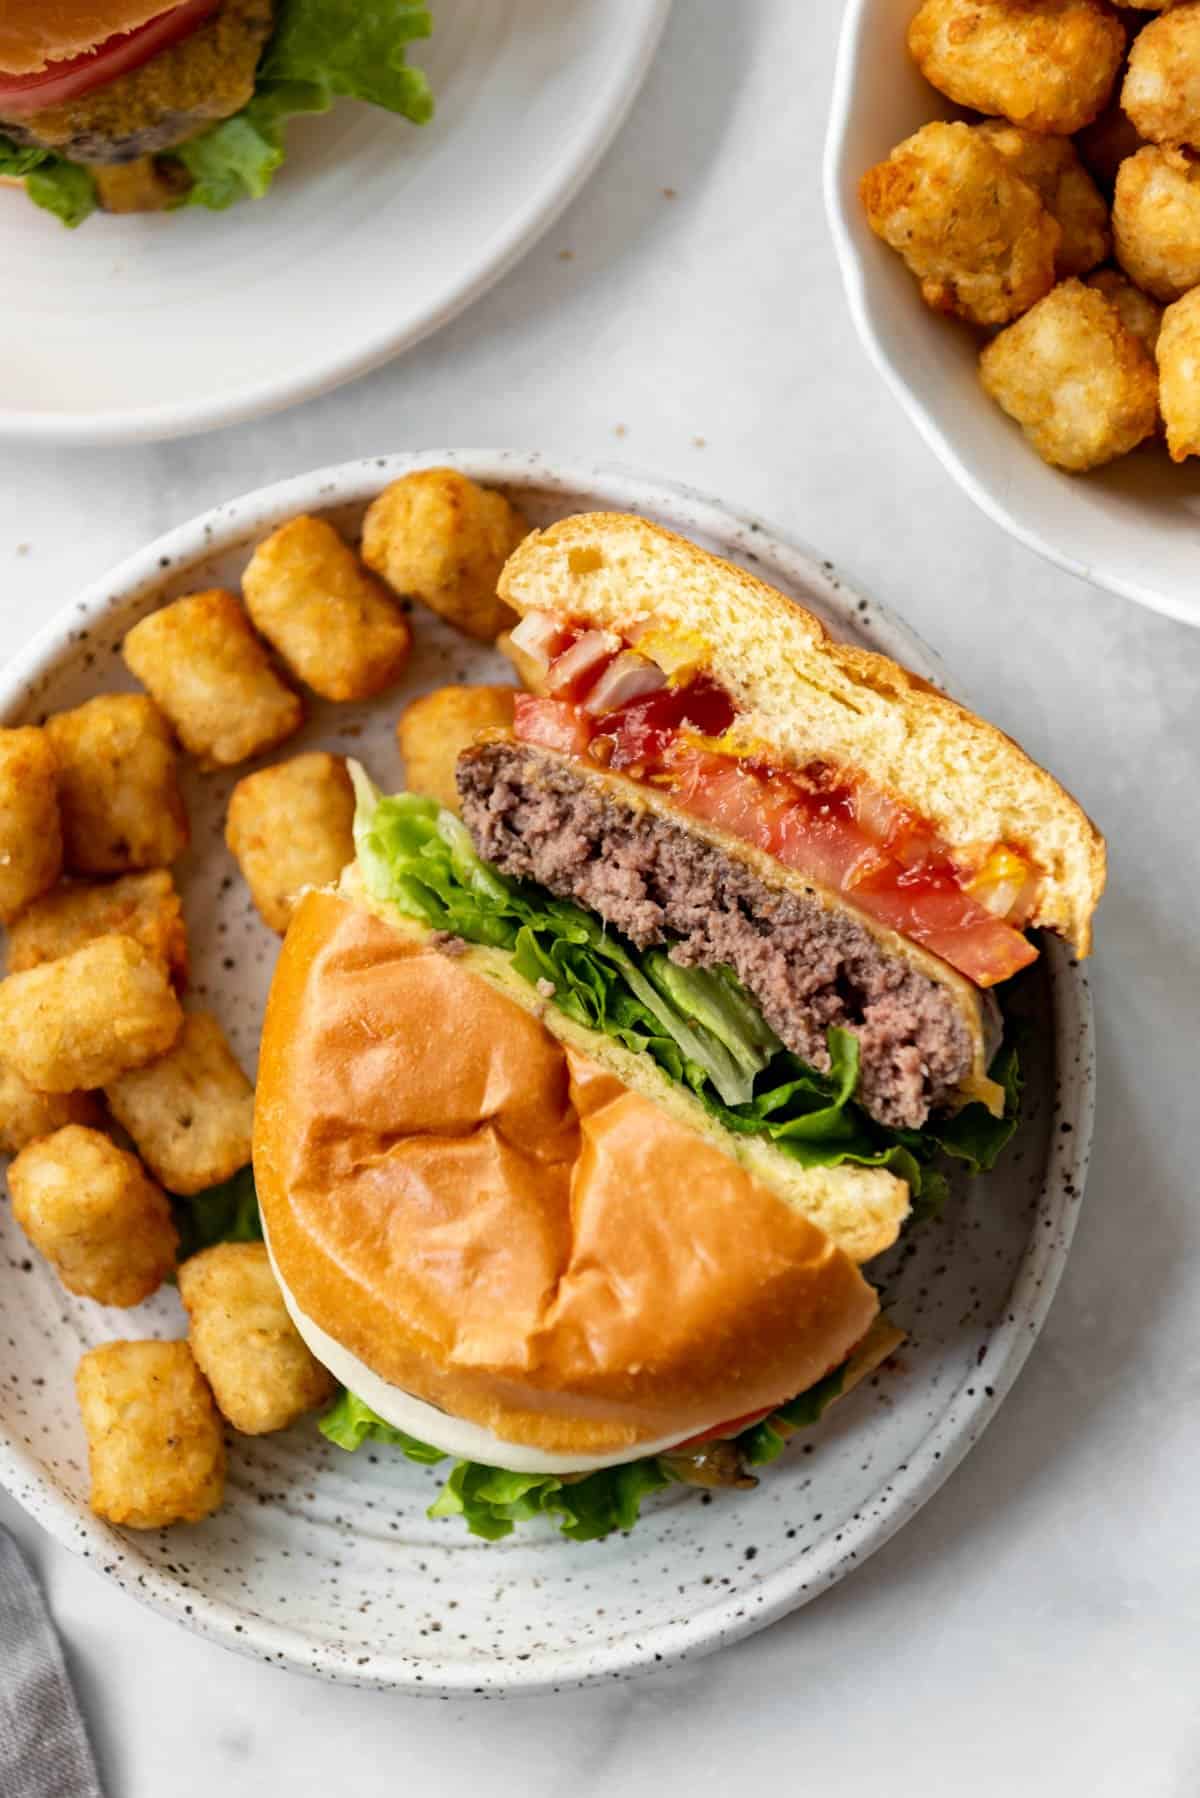 An air fryer hamburger cut in half on a plate with tater tots.